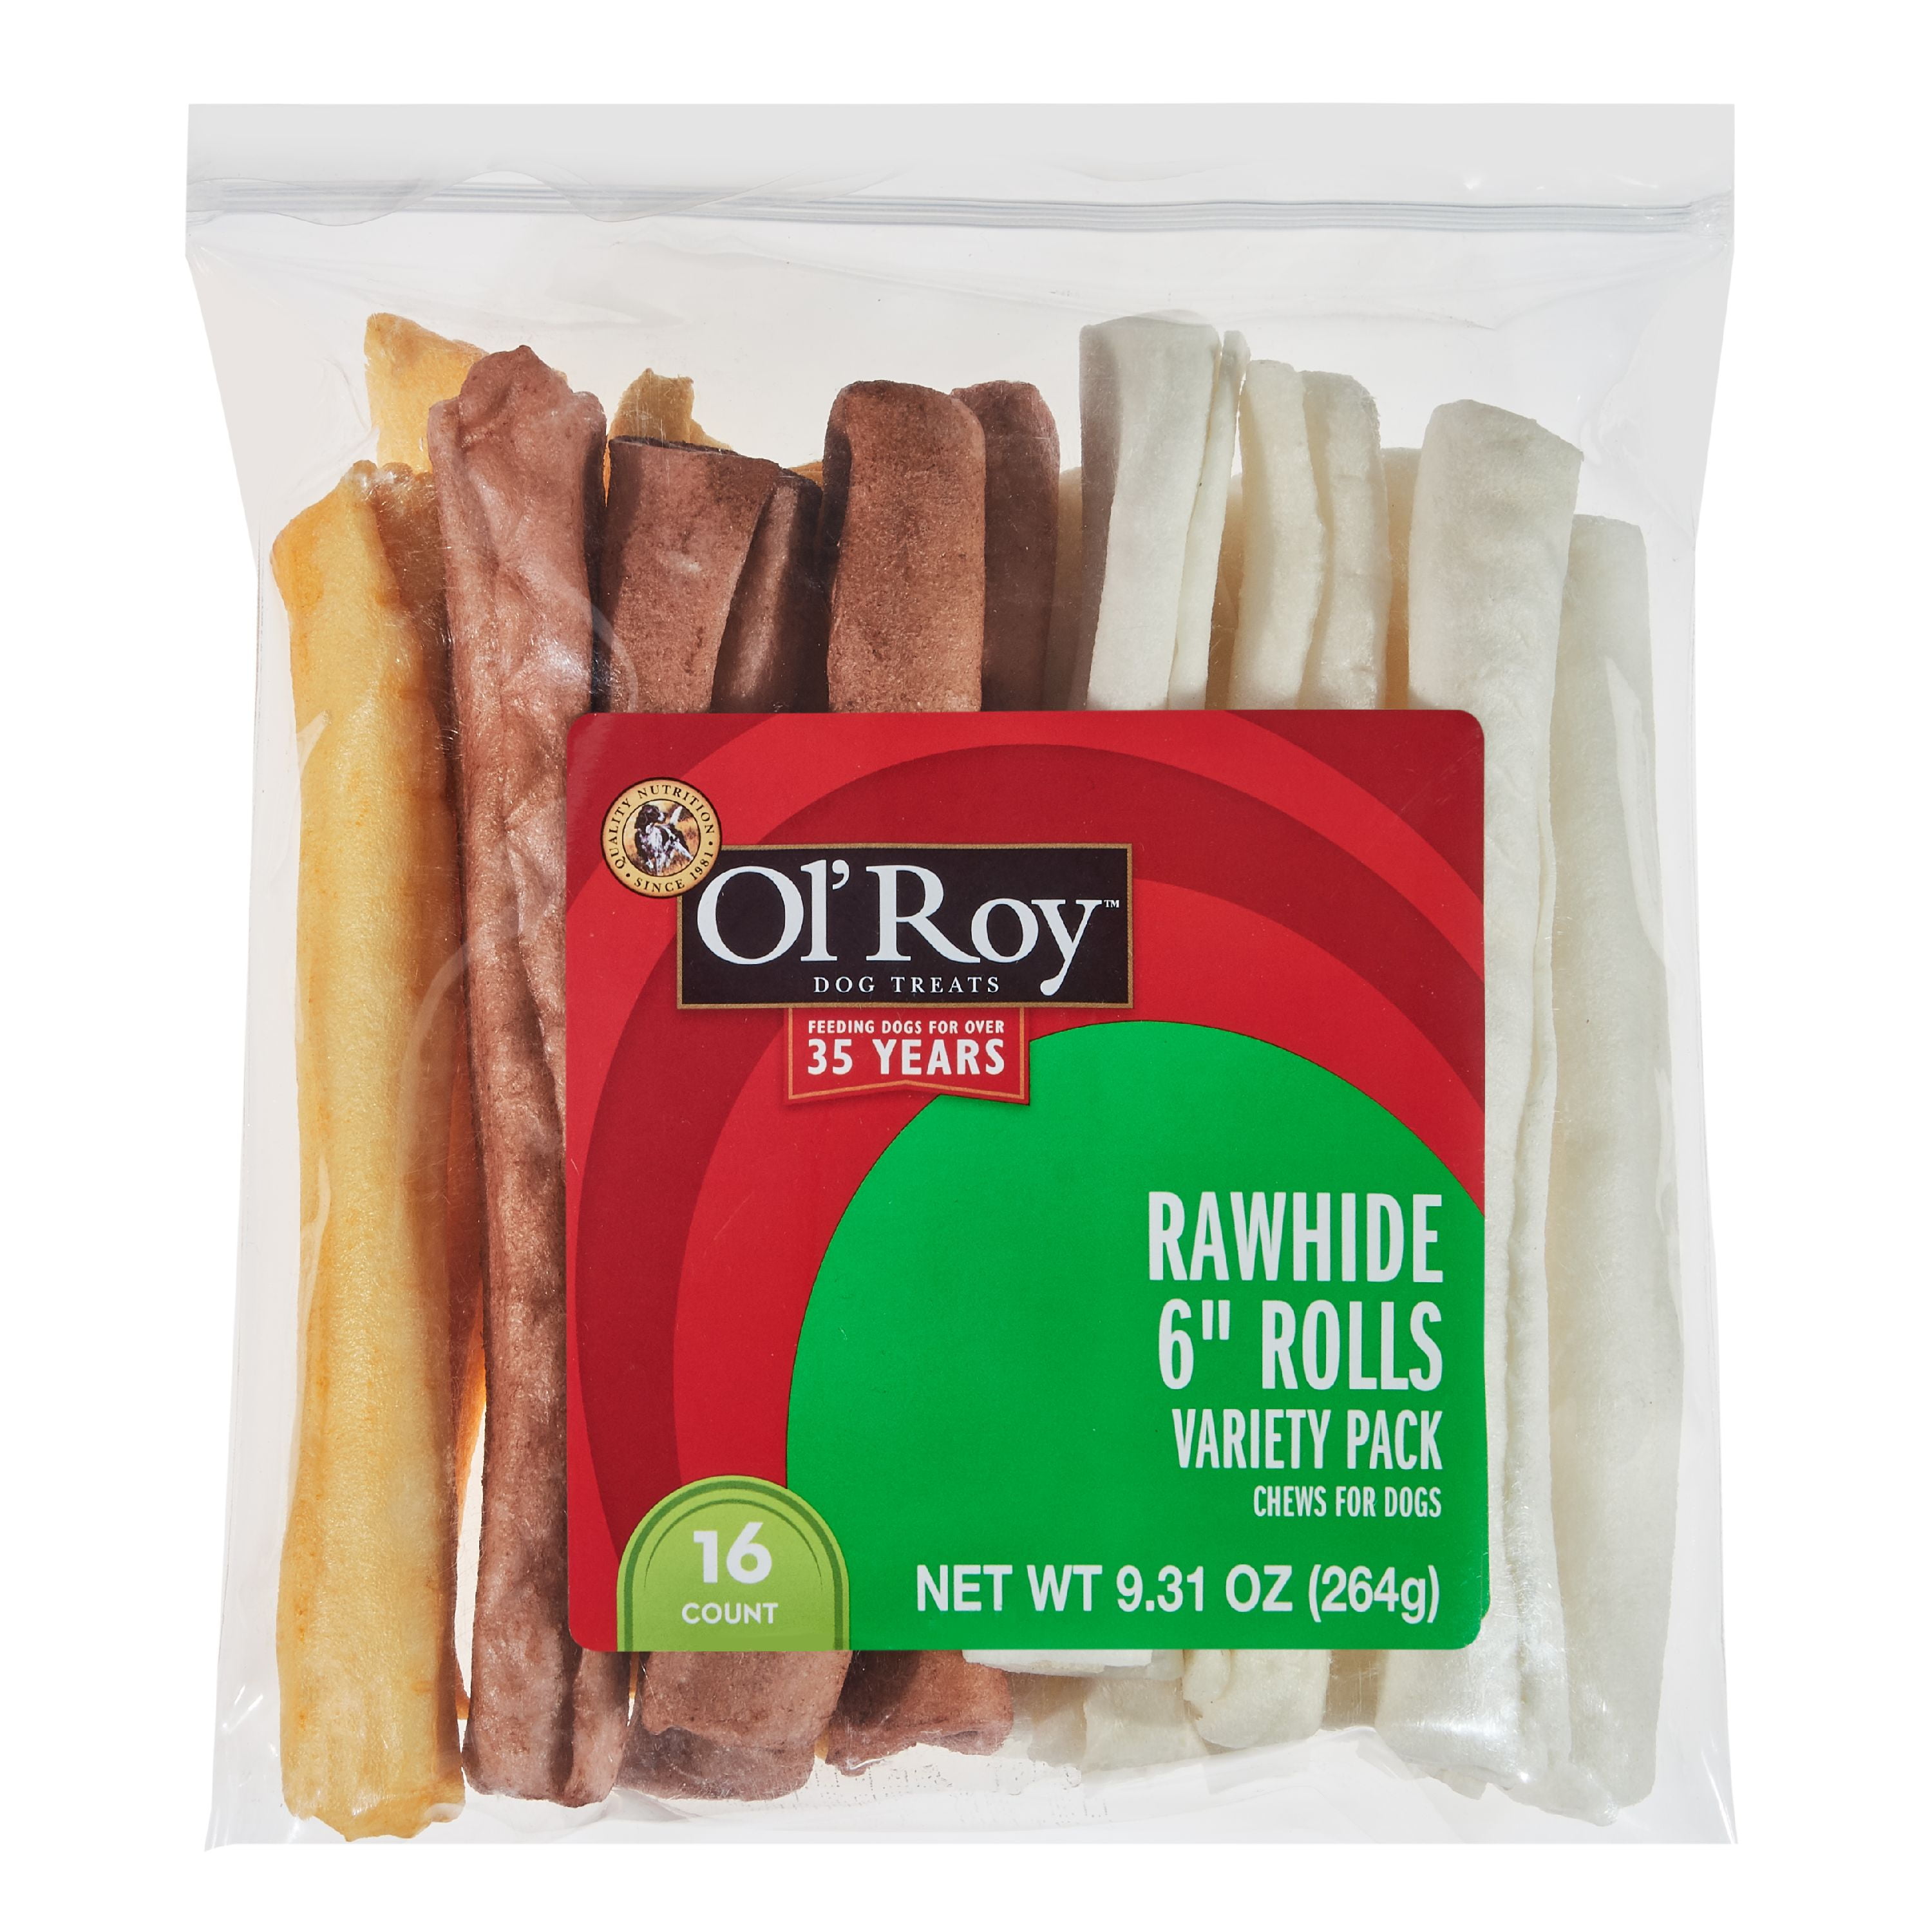 Ol' Roy Rawhide Rolls, Variety Pack, Chews for Dogs, 9.31 oz, 16 Count, Dry